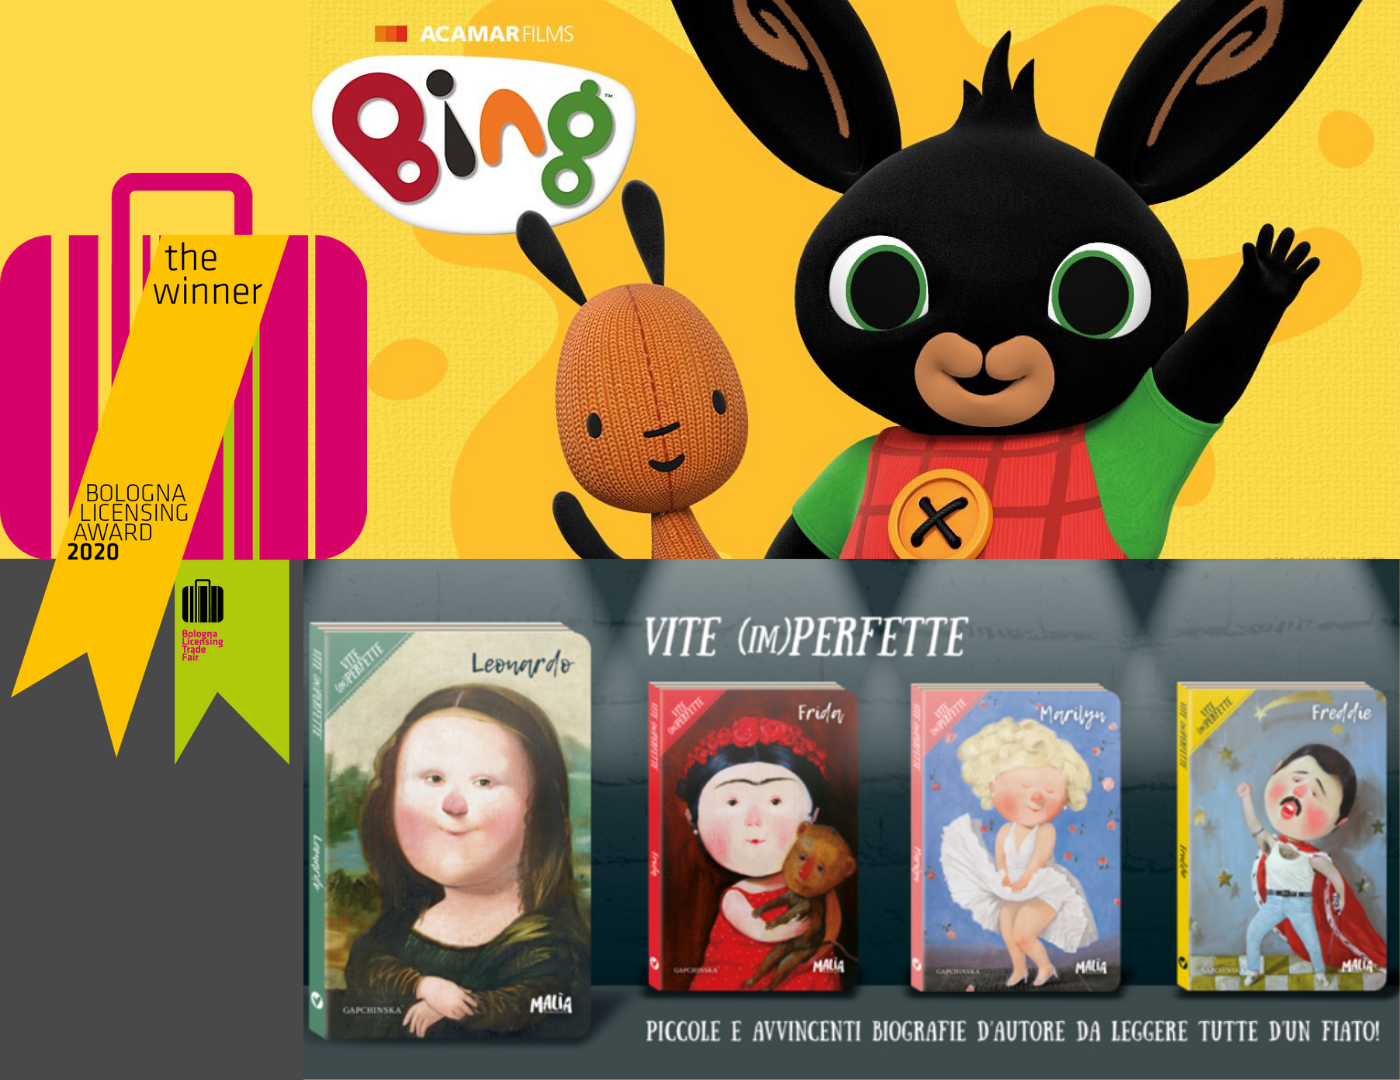 This year Bologna Licensing Award winners are two of Maurizio Distefano Licensing’s properties: Bing and Gapchinska image